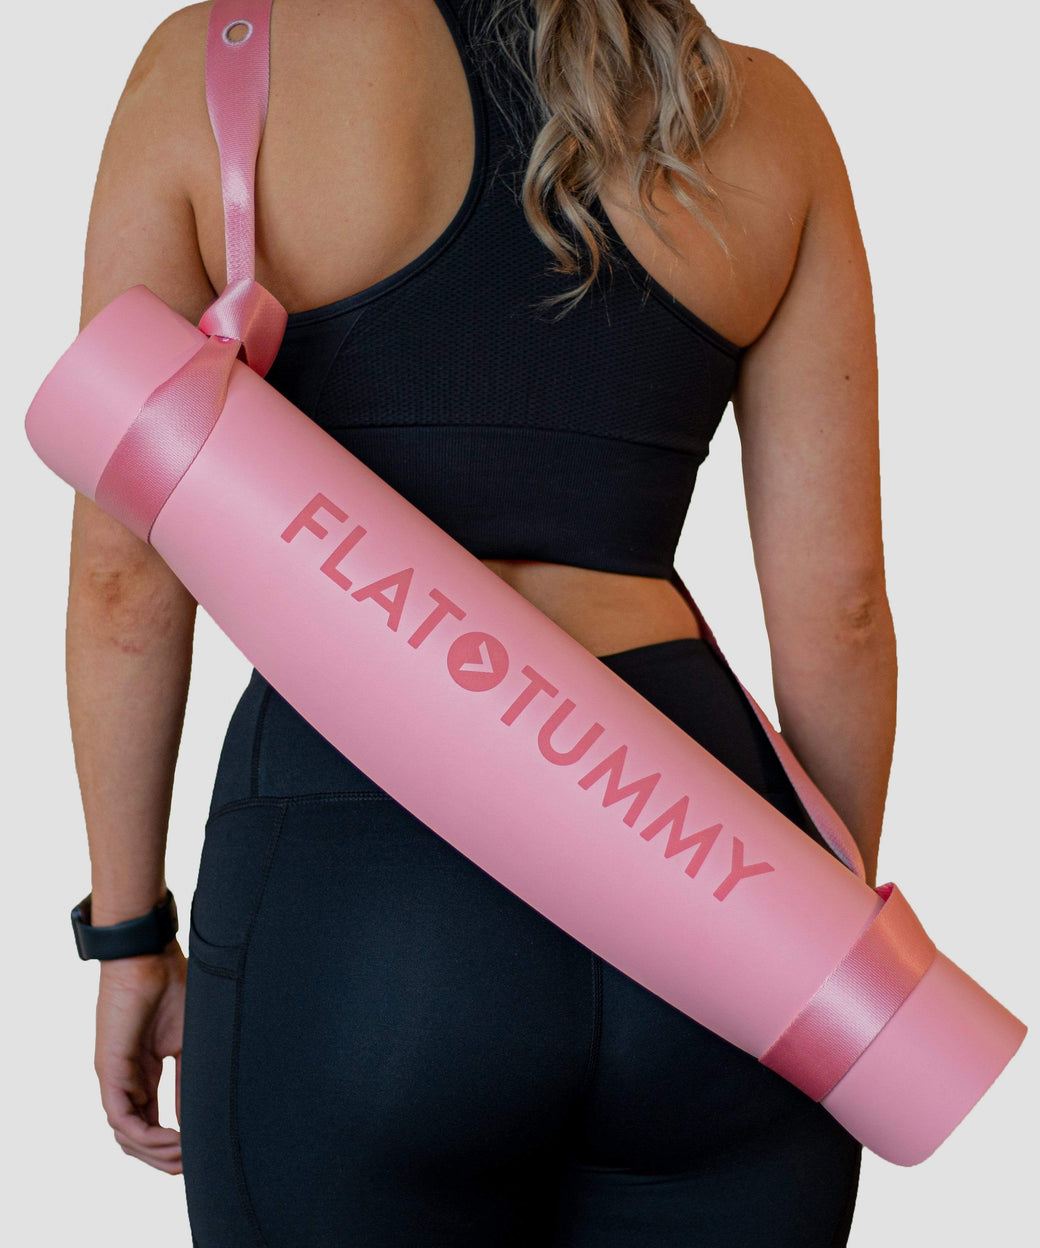 Buy Galaxy Yoga Mat by Workouts By Katya online - WBK FIT